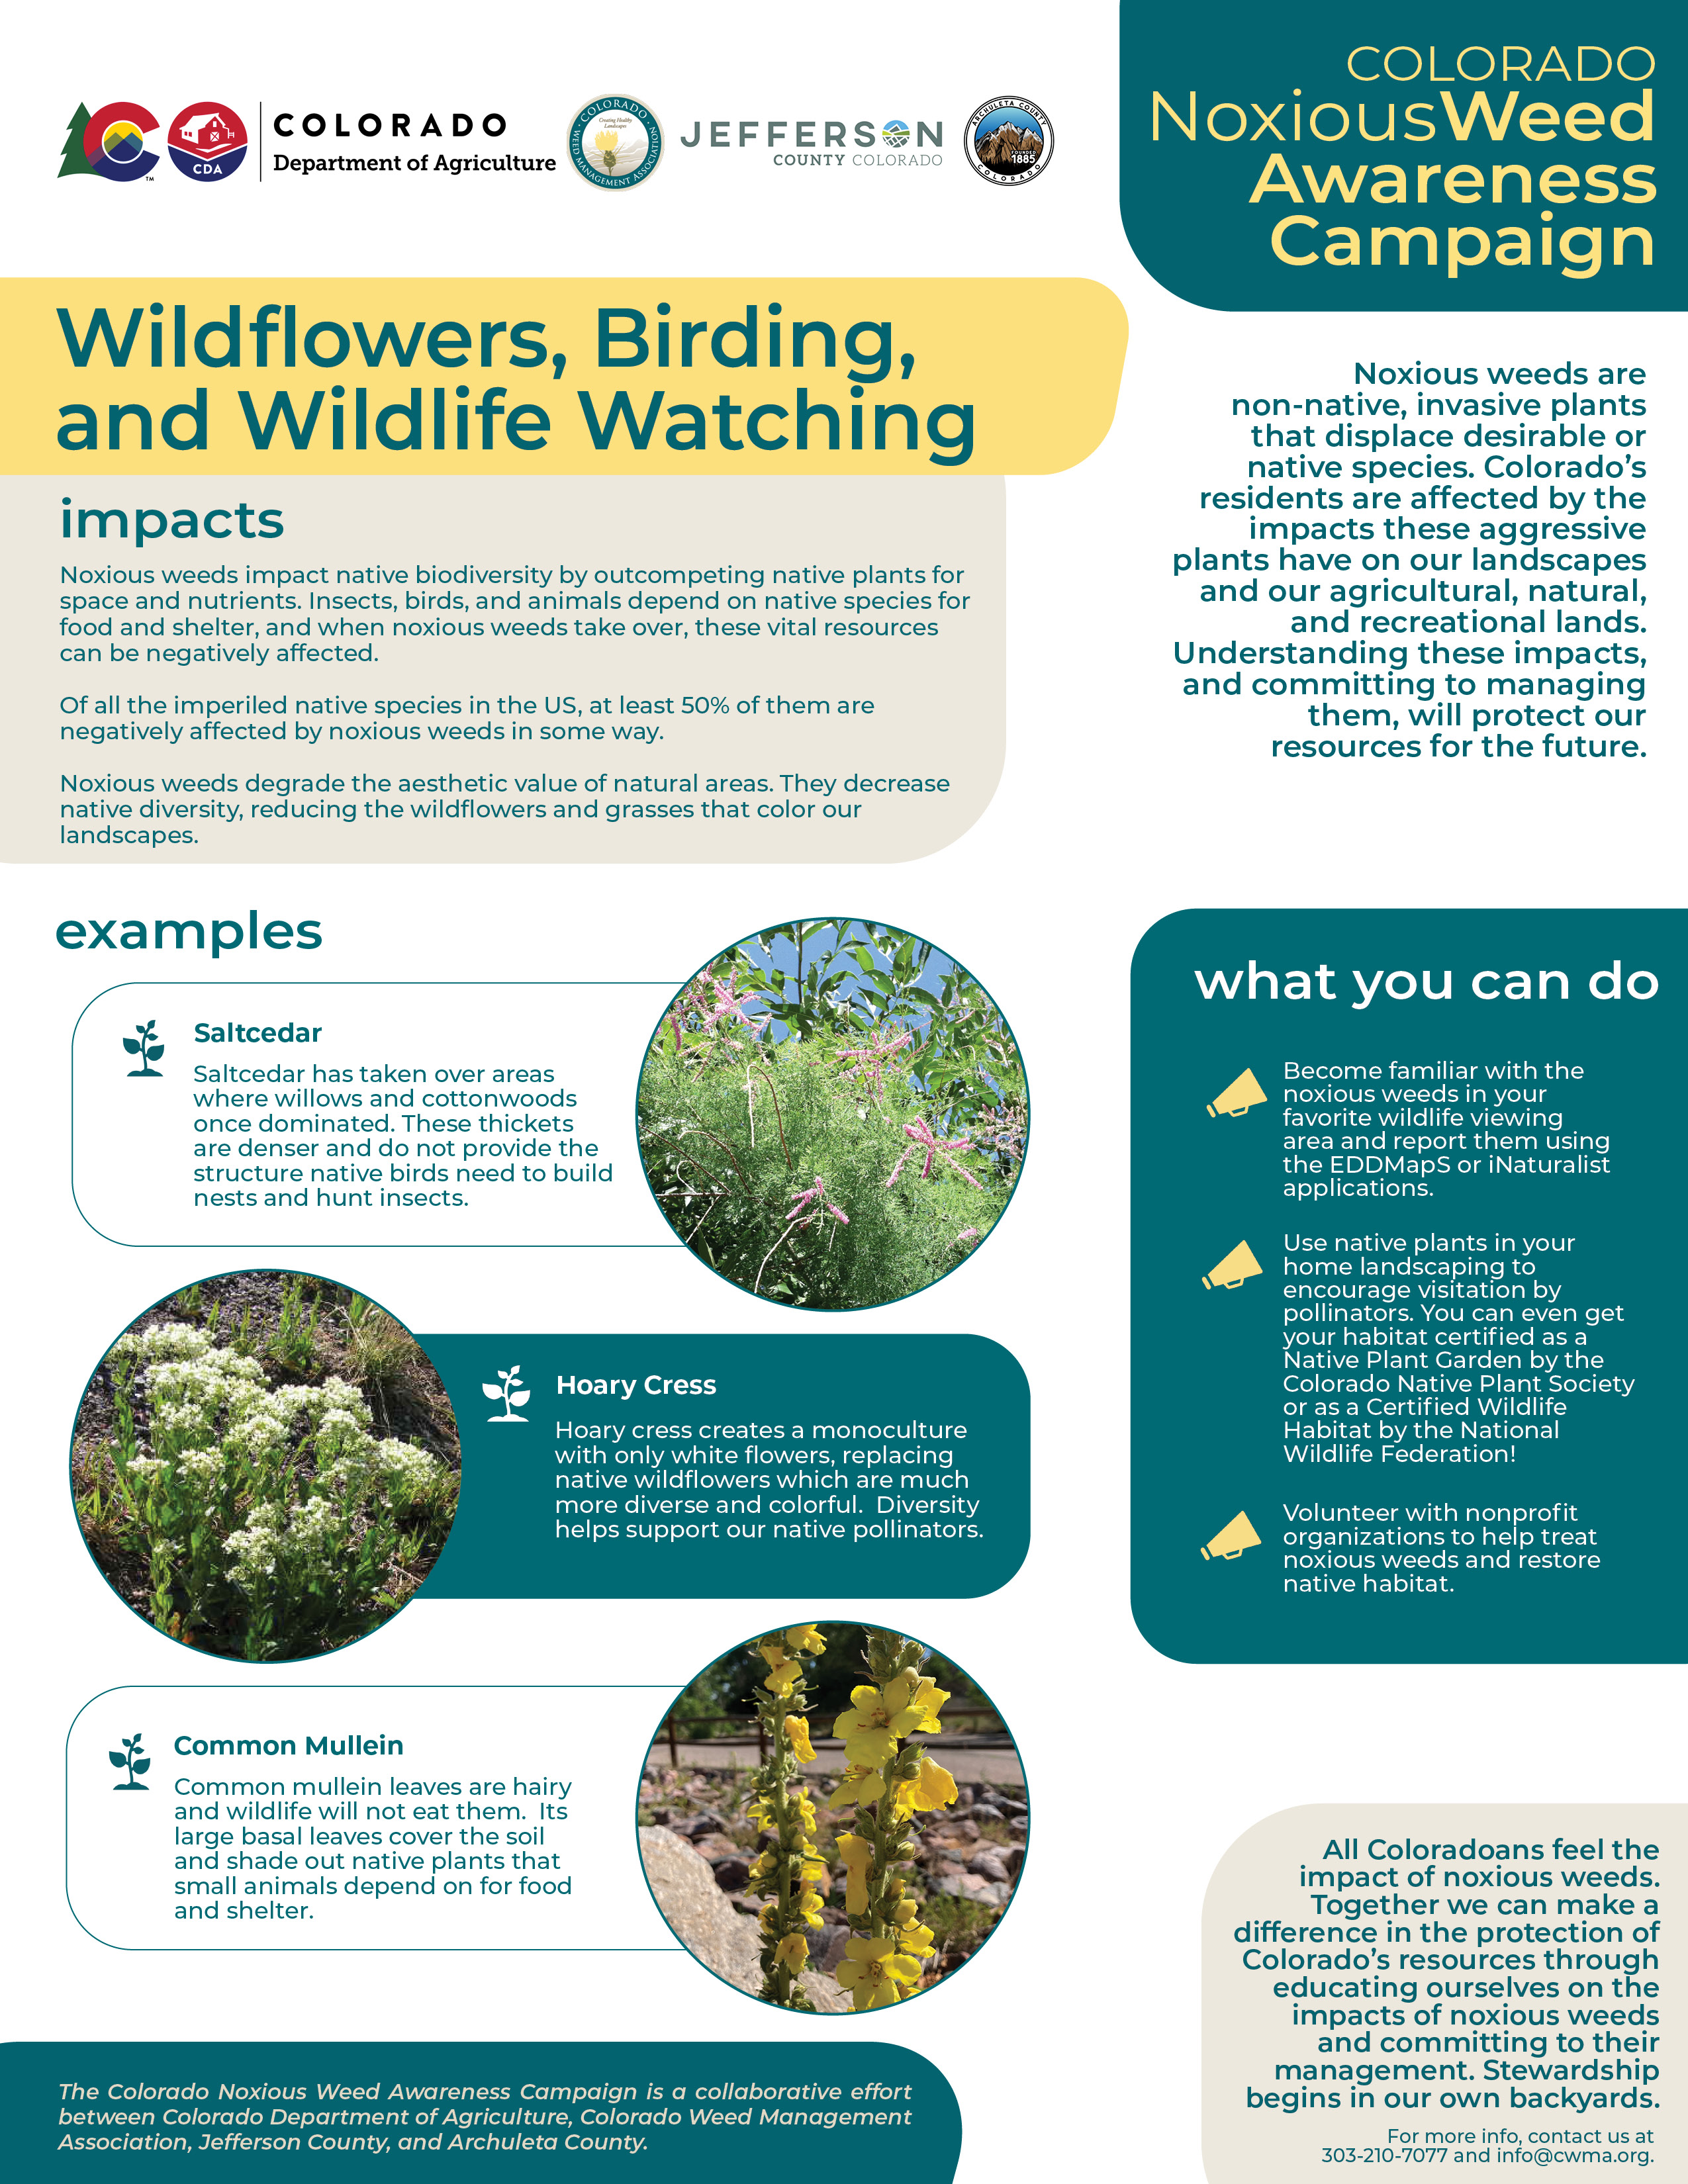 Graphic with information about the impact of noxious weeds on wildflowers, birding, and wildlife watching.